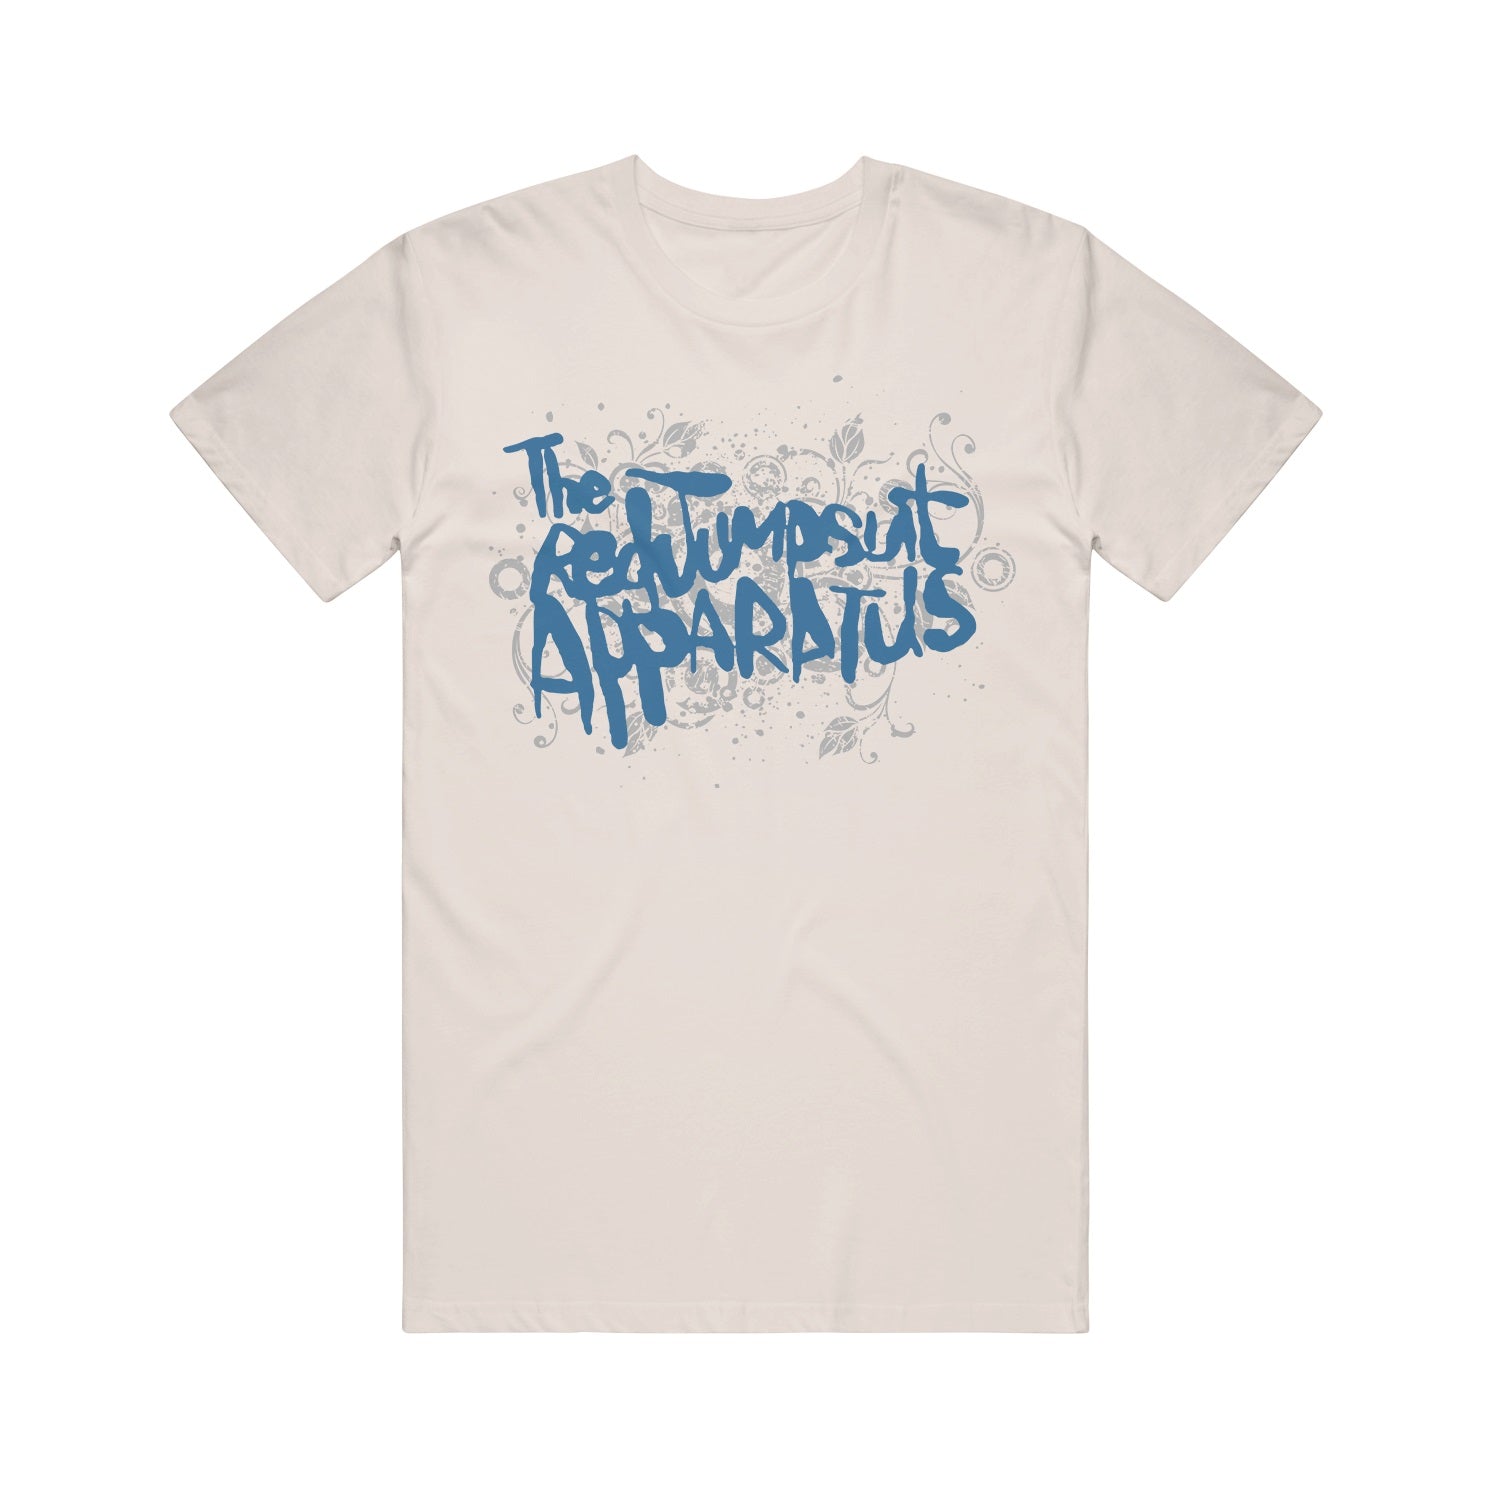 The Red Jumpsuit Apparatus The Awakening Album Cover T-Shirt White